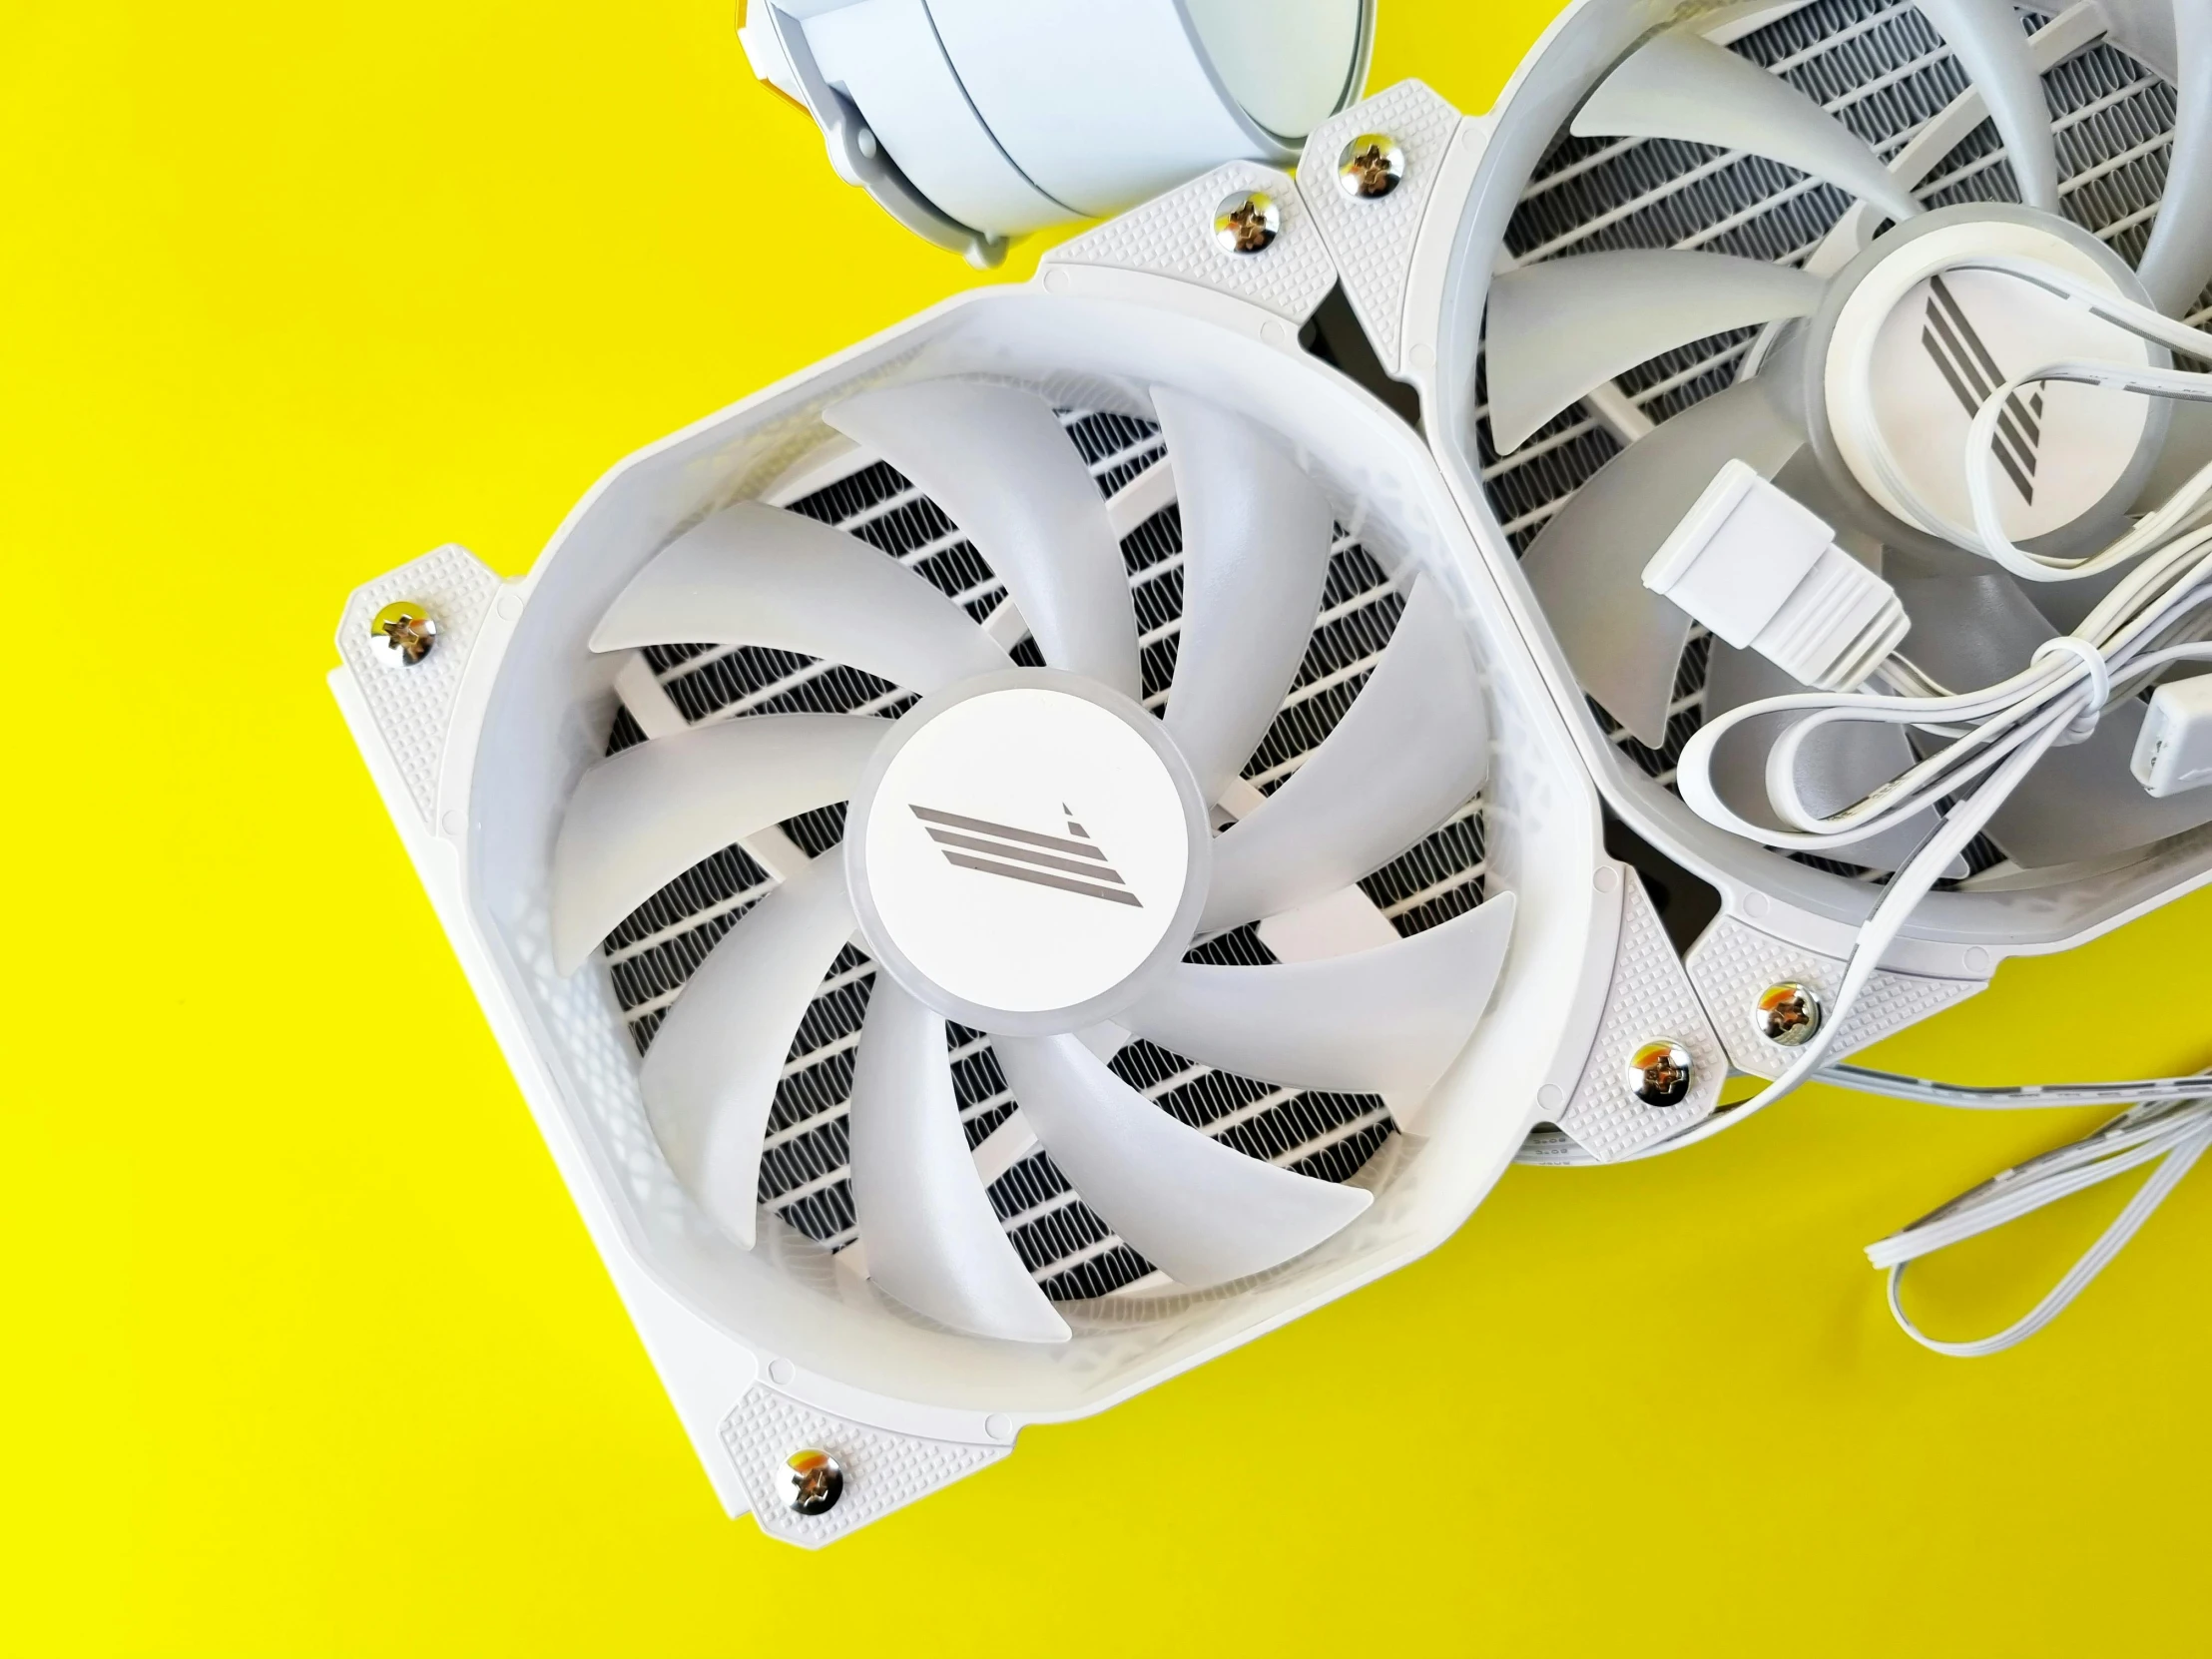 there are several white computers fans in this case